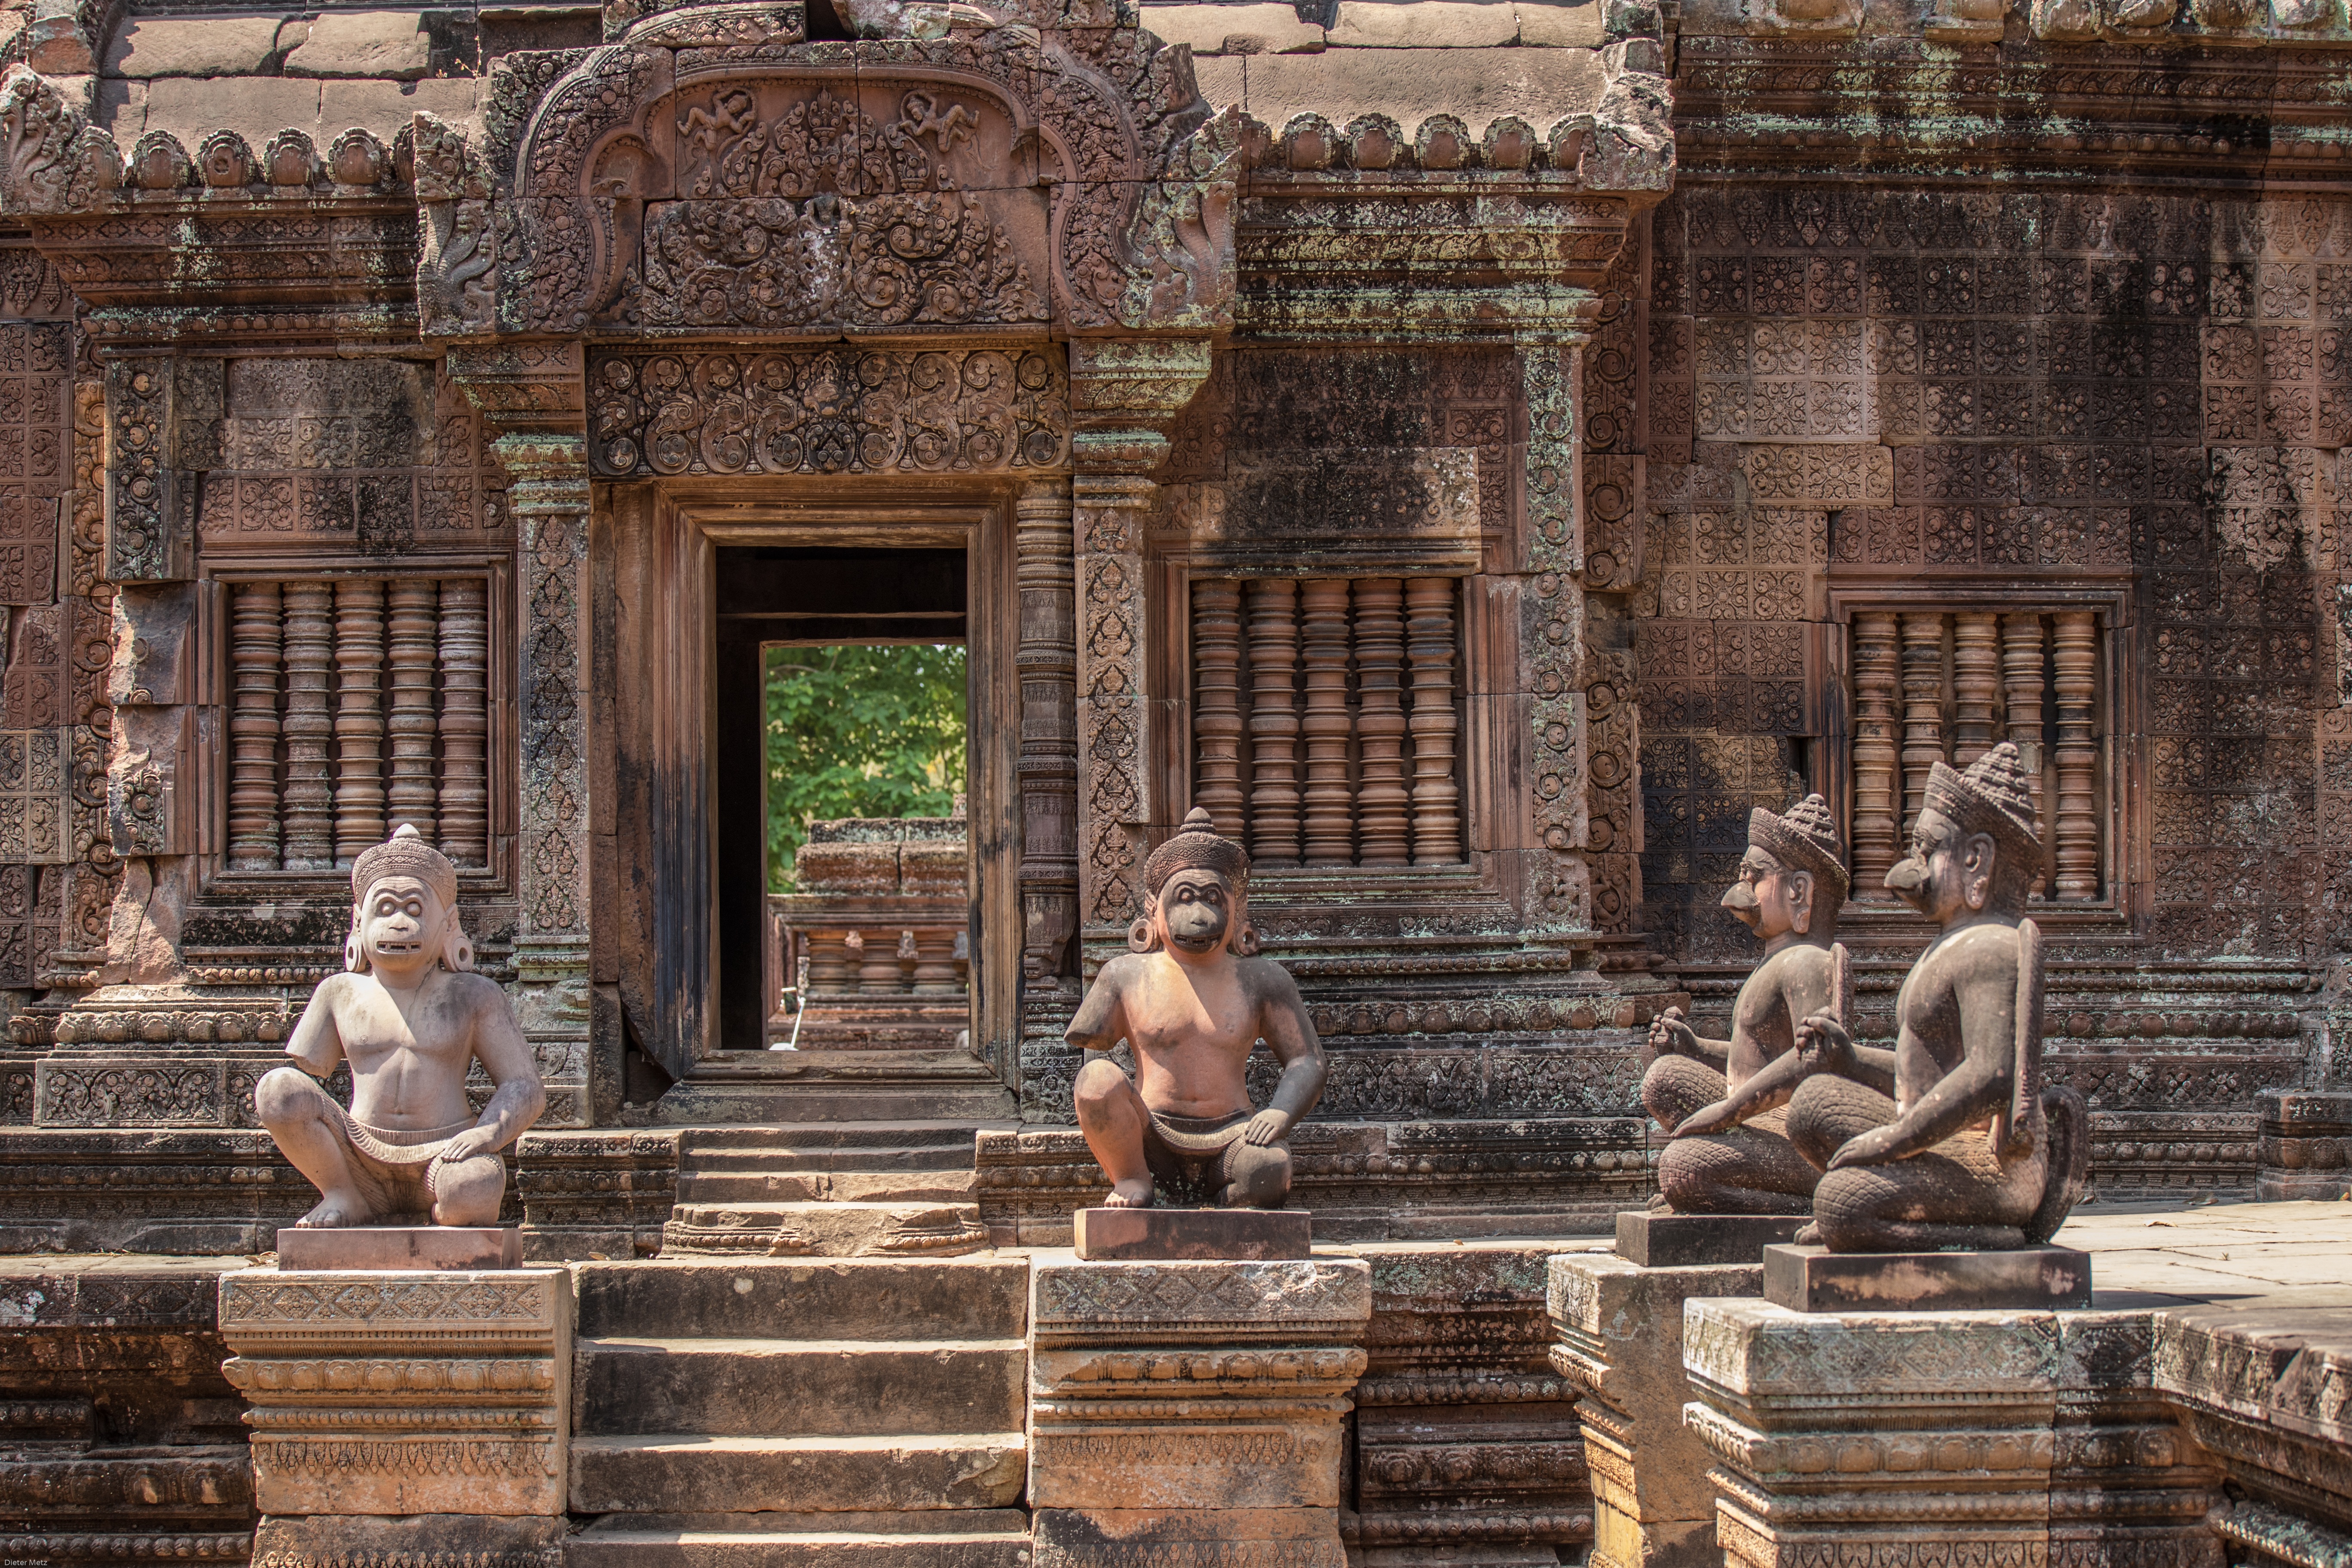 Banteay Srei is a Cambodian temple dedicated to the Hindu god Shiva by dMz